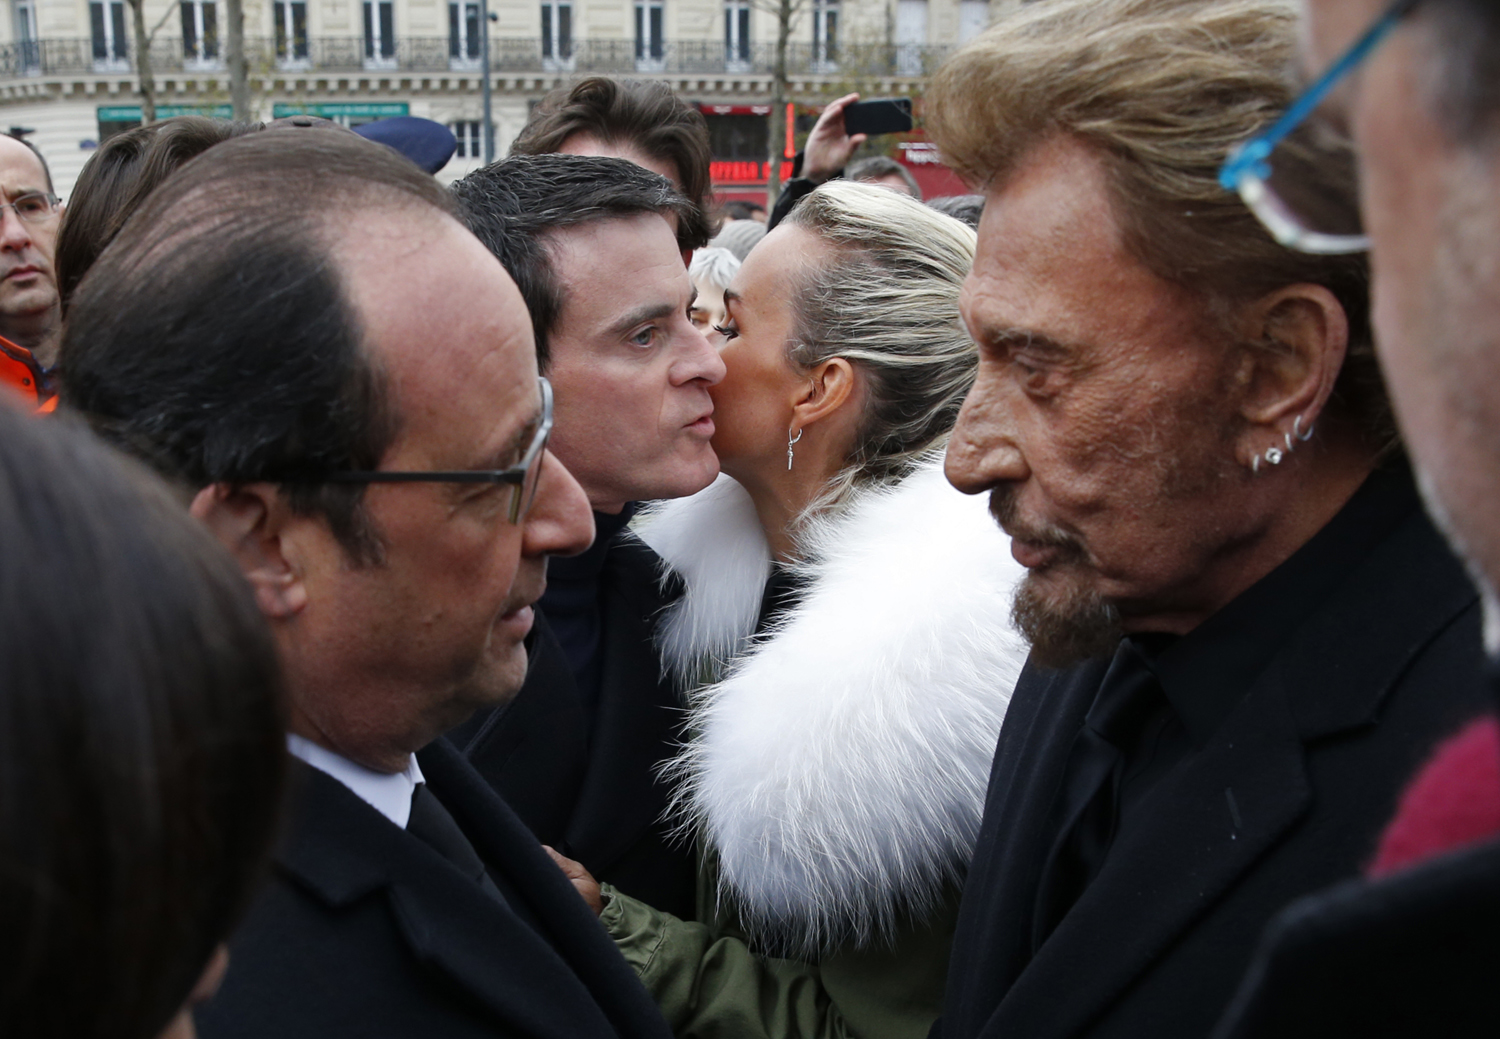 French President Francois Hollande (L) speaks with French singer Johnny Hallyday (R) as Prime Minister Manuel Valls (2ndL) kisses Hallyday's wife Laeticia at the end of a ceremony held on January 10, 2016 to mark a year since 1.6 million people thronged the French capital in a show of unity after attacks on the Charlie Hebdo newspaper and a Jewish supermarket. Just as it was last year, the vast Place de la Republique will be the focus of the gathering as people reiterate their support for freedom of expression and remember the other victims of what would become a year of jihadist outrages in France, culminating in the November 13 coordinated shootings and suicide bombings that killed 130 people and were claimed by the Islamic State (IS) group. / AFP / POOL / PHILIPPE WOJAZER